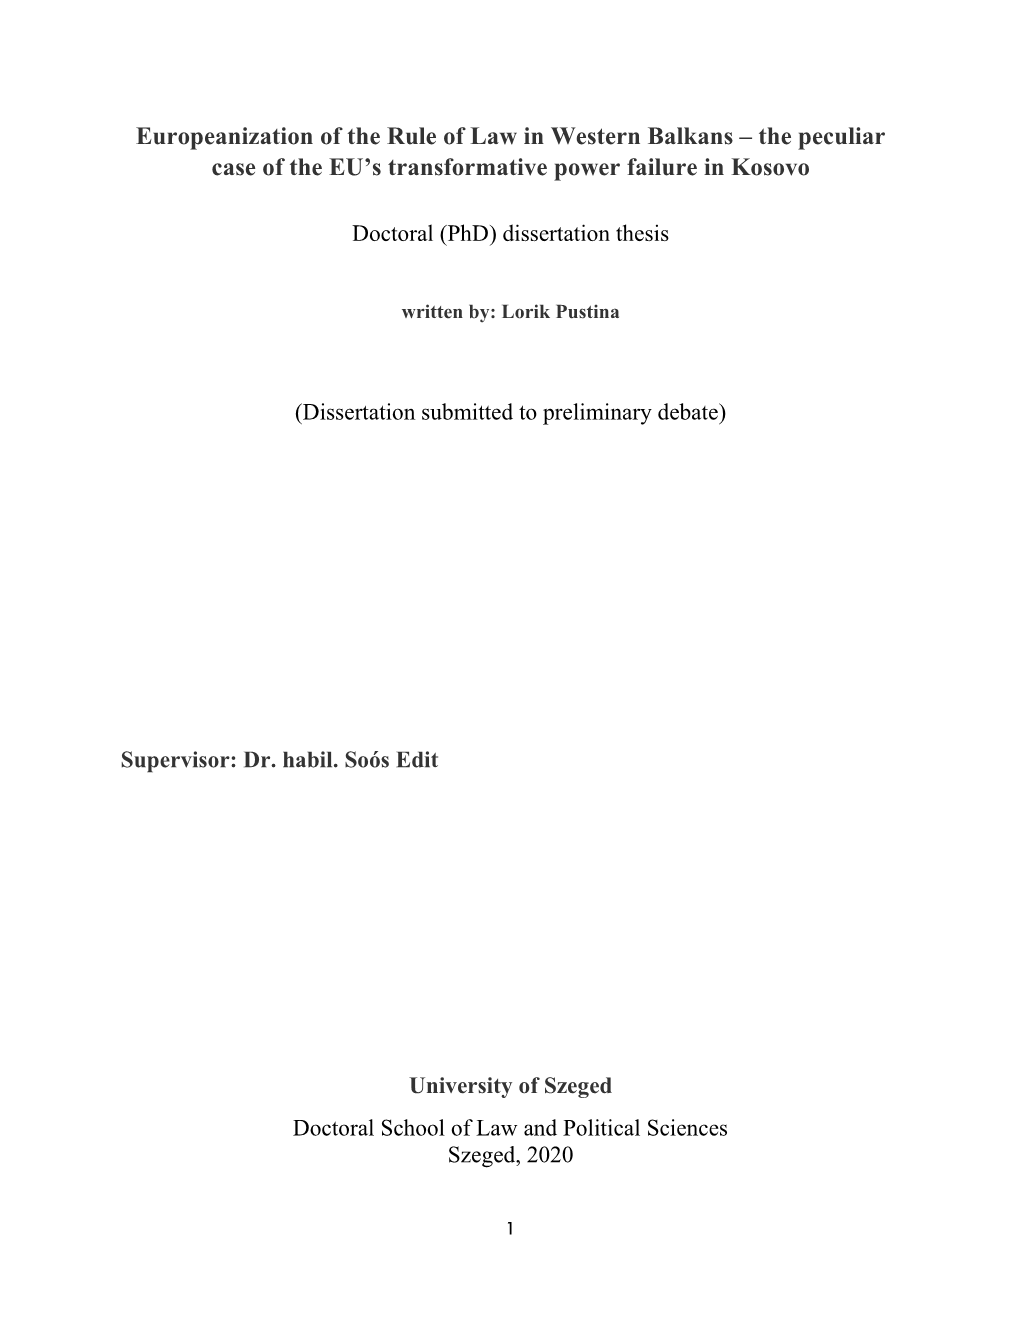 Europeanization of the Rule of Law in Western Balkans – the Peculiar Case of the EU’S Transformative Power Failure in Kosovo